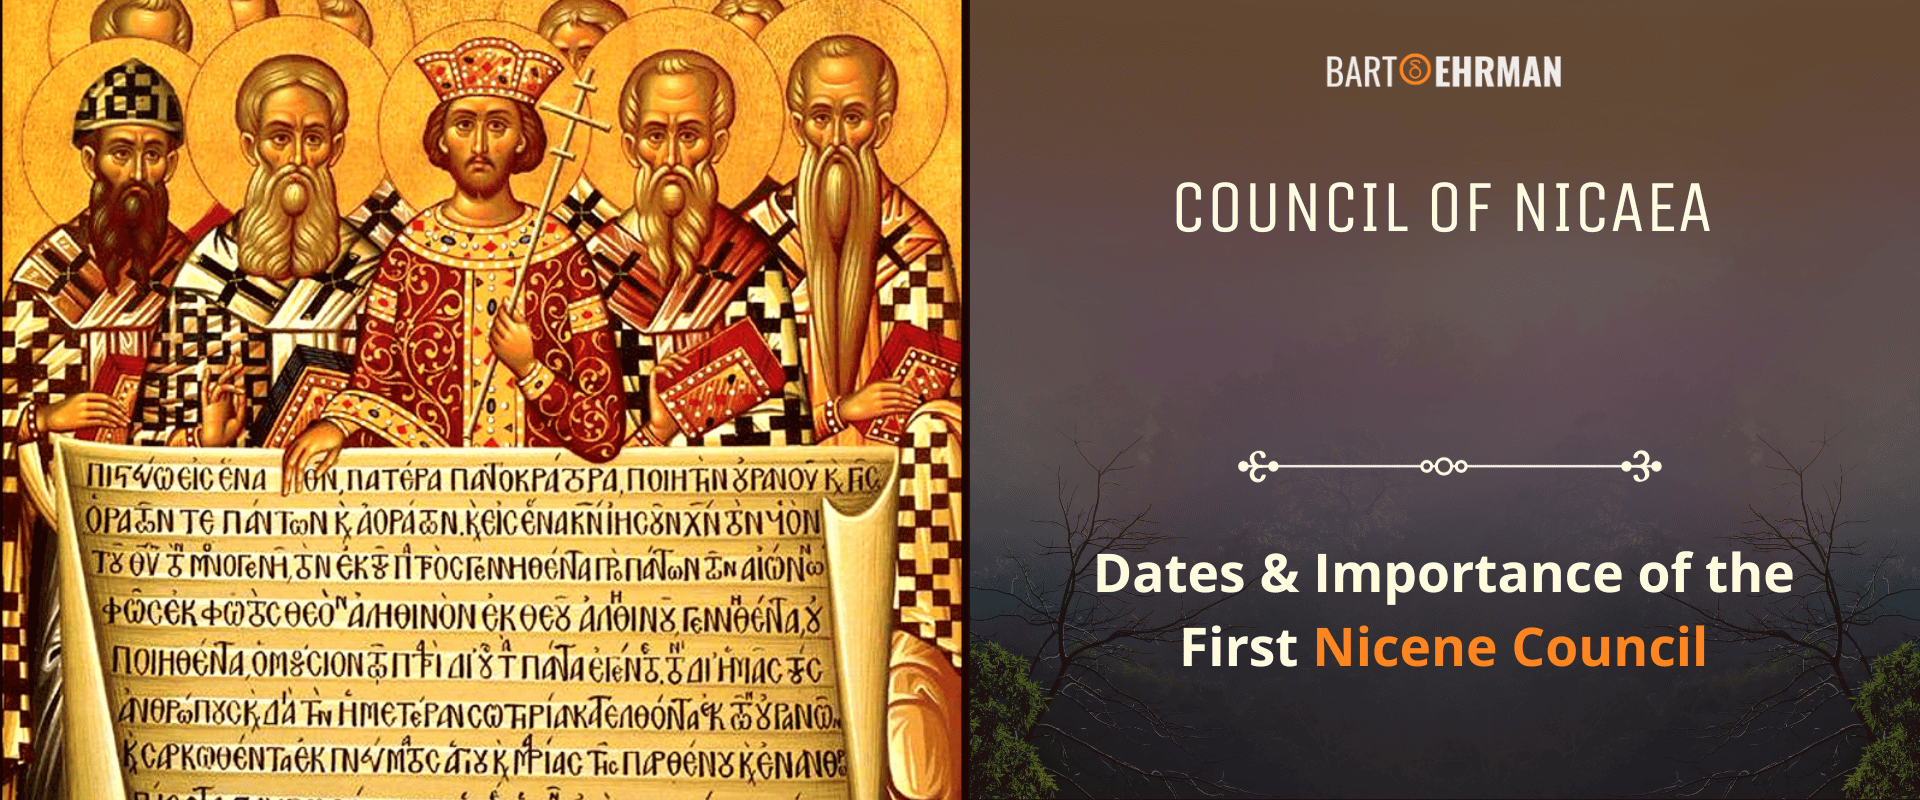 Council of Nicaea - Dates & Importance of the First Nicene Council